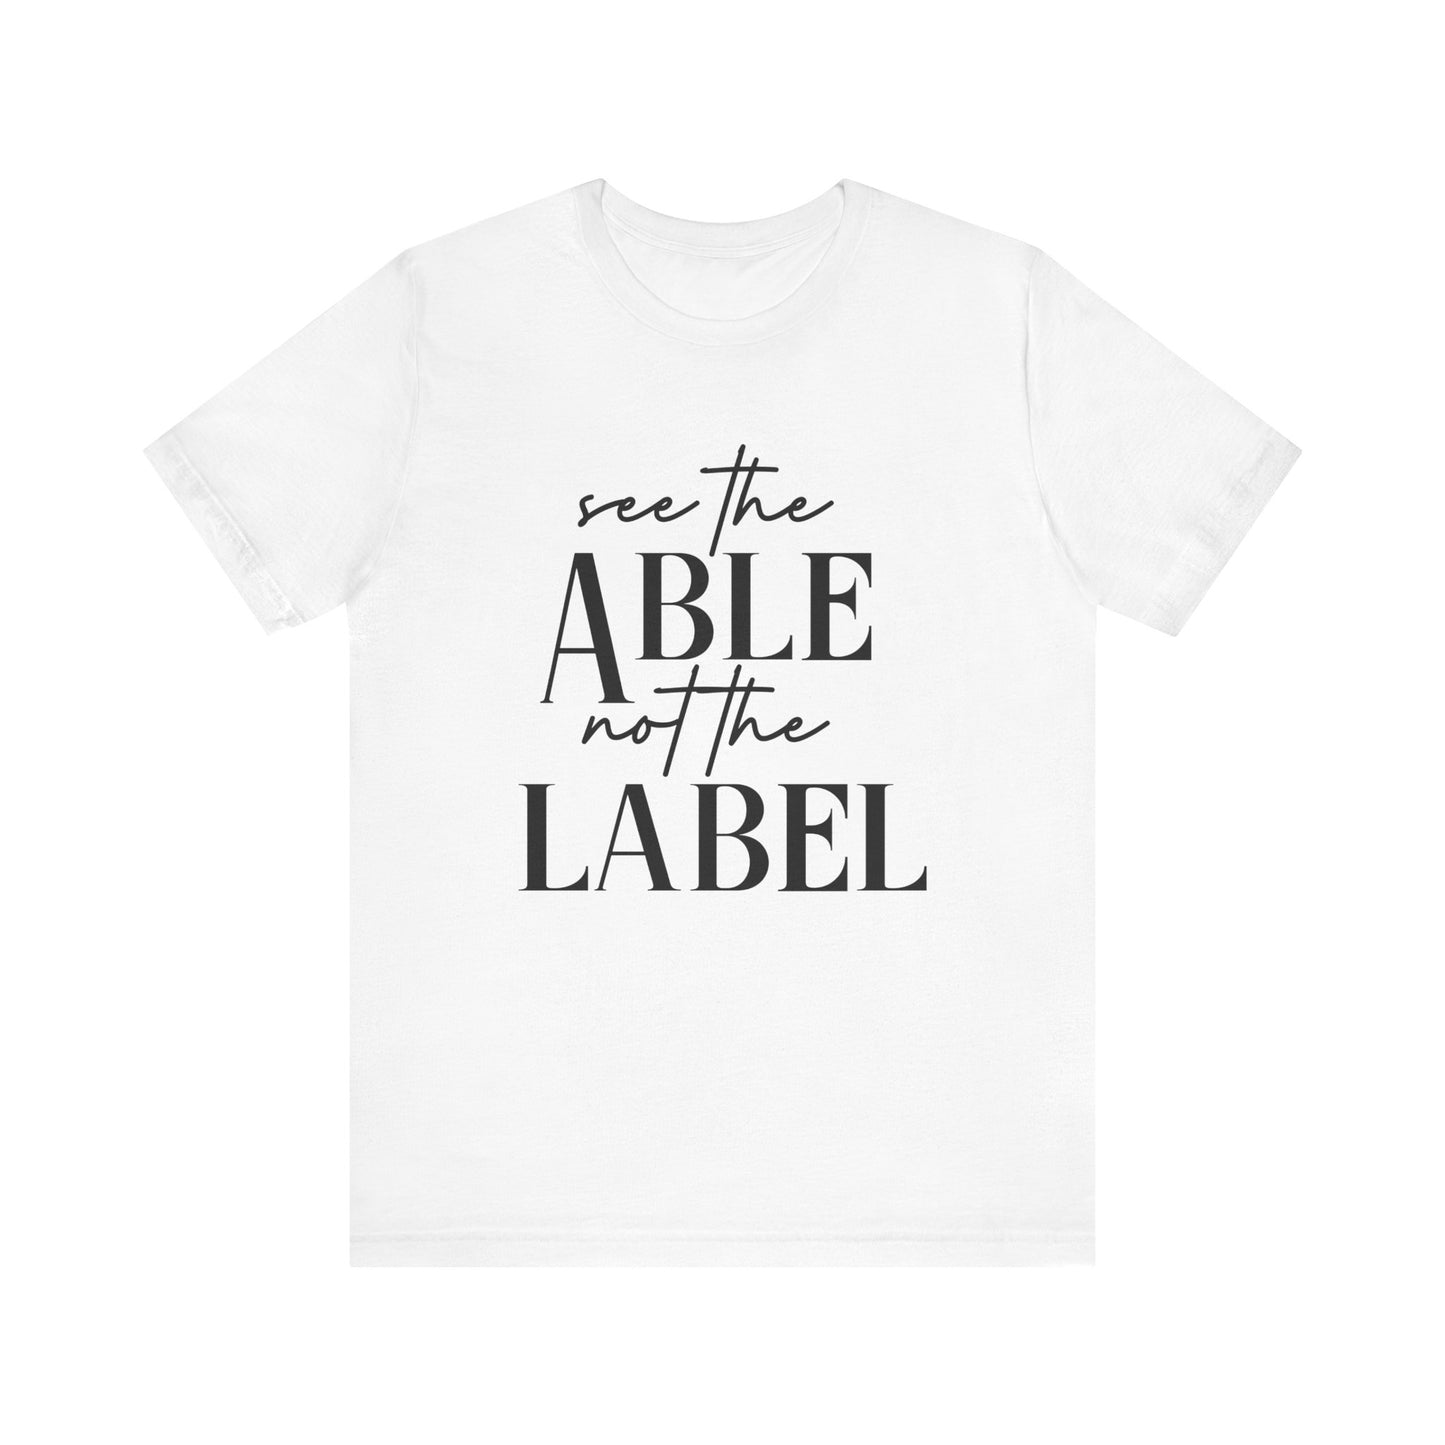 See The Able Not The Label Autism Advocate Shirt Adult Unisex Short Sleeve Tee